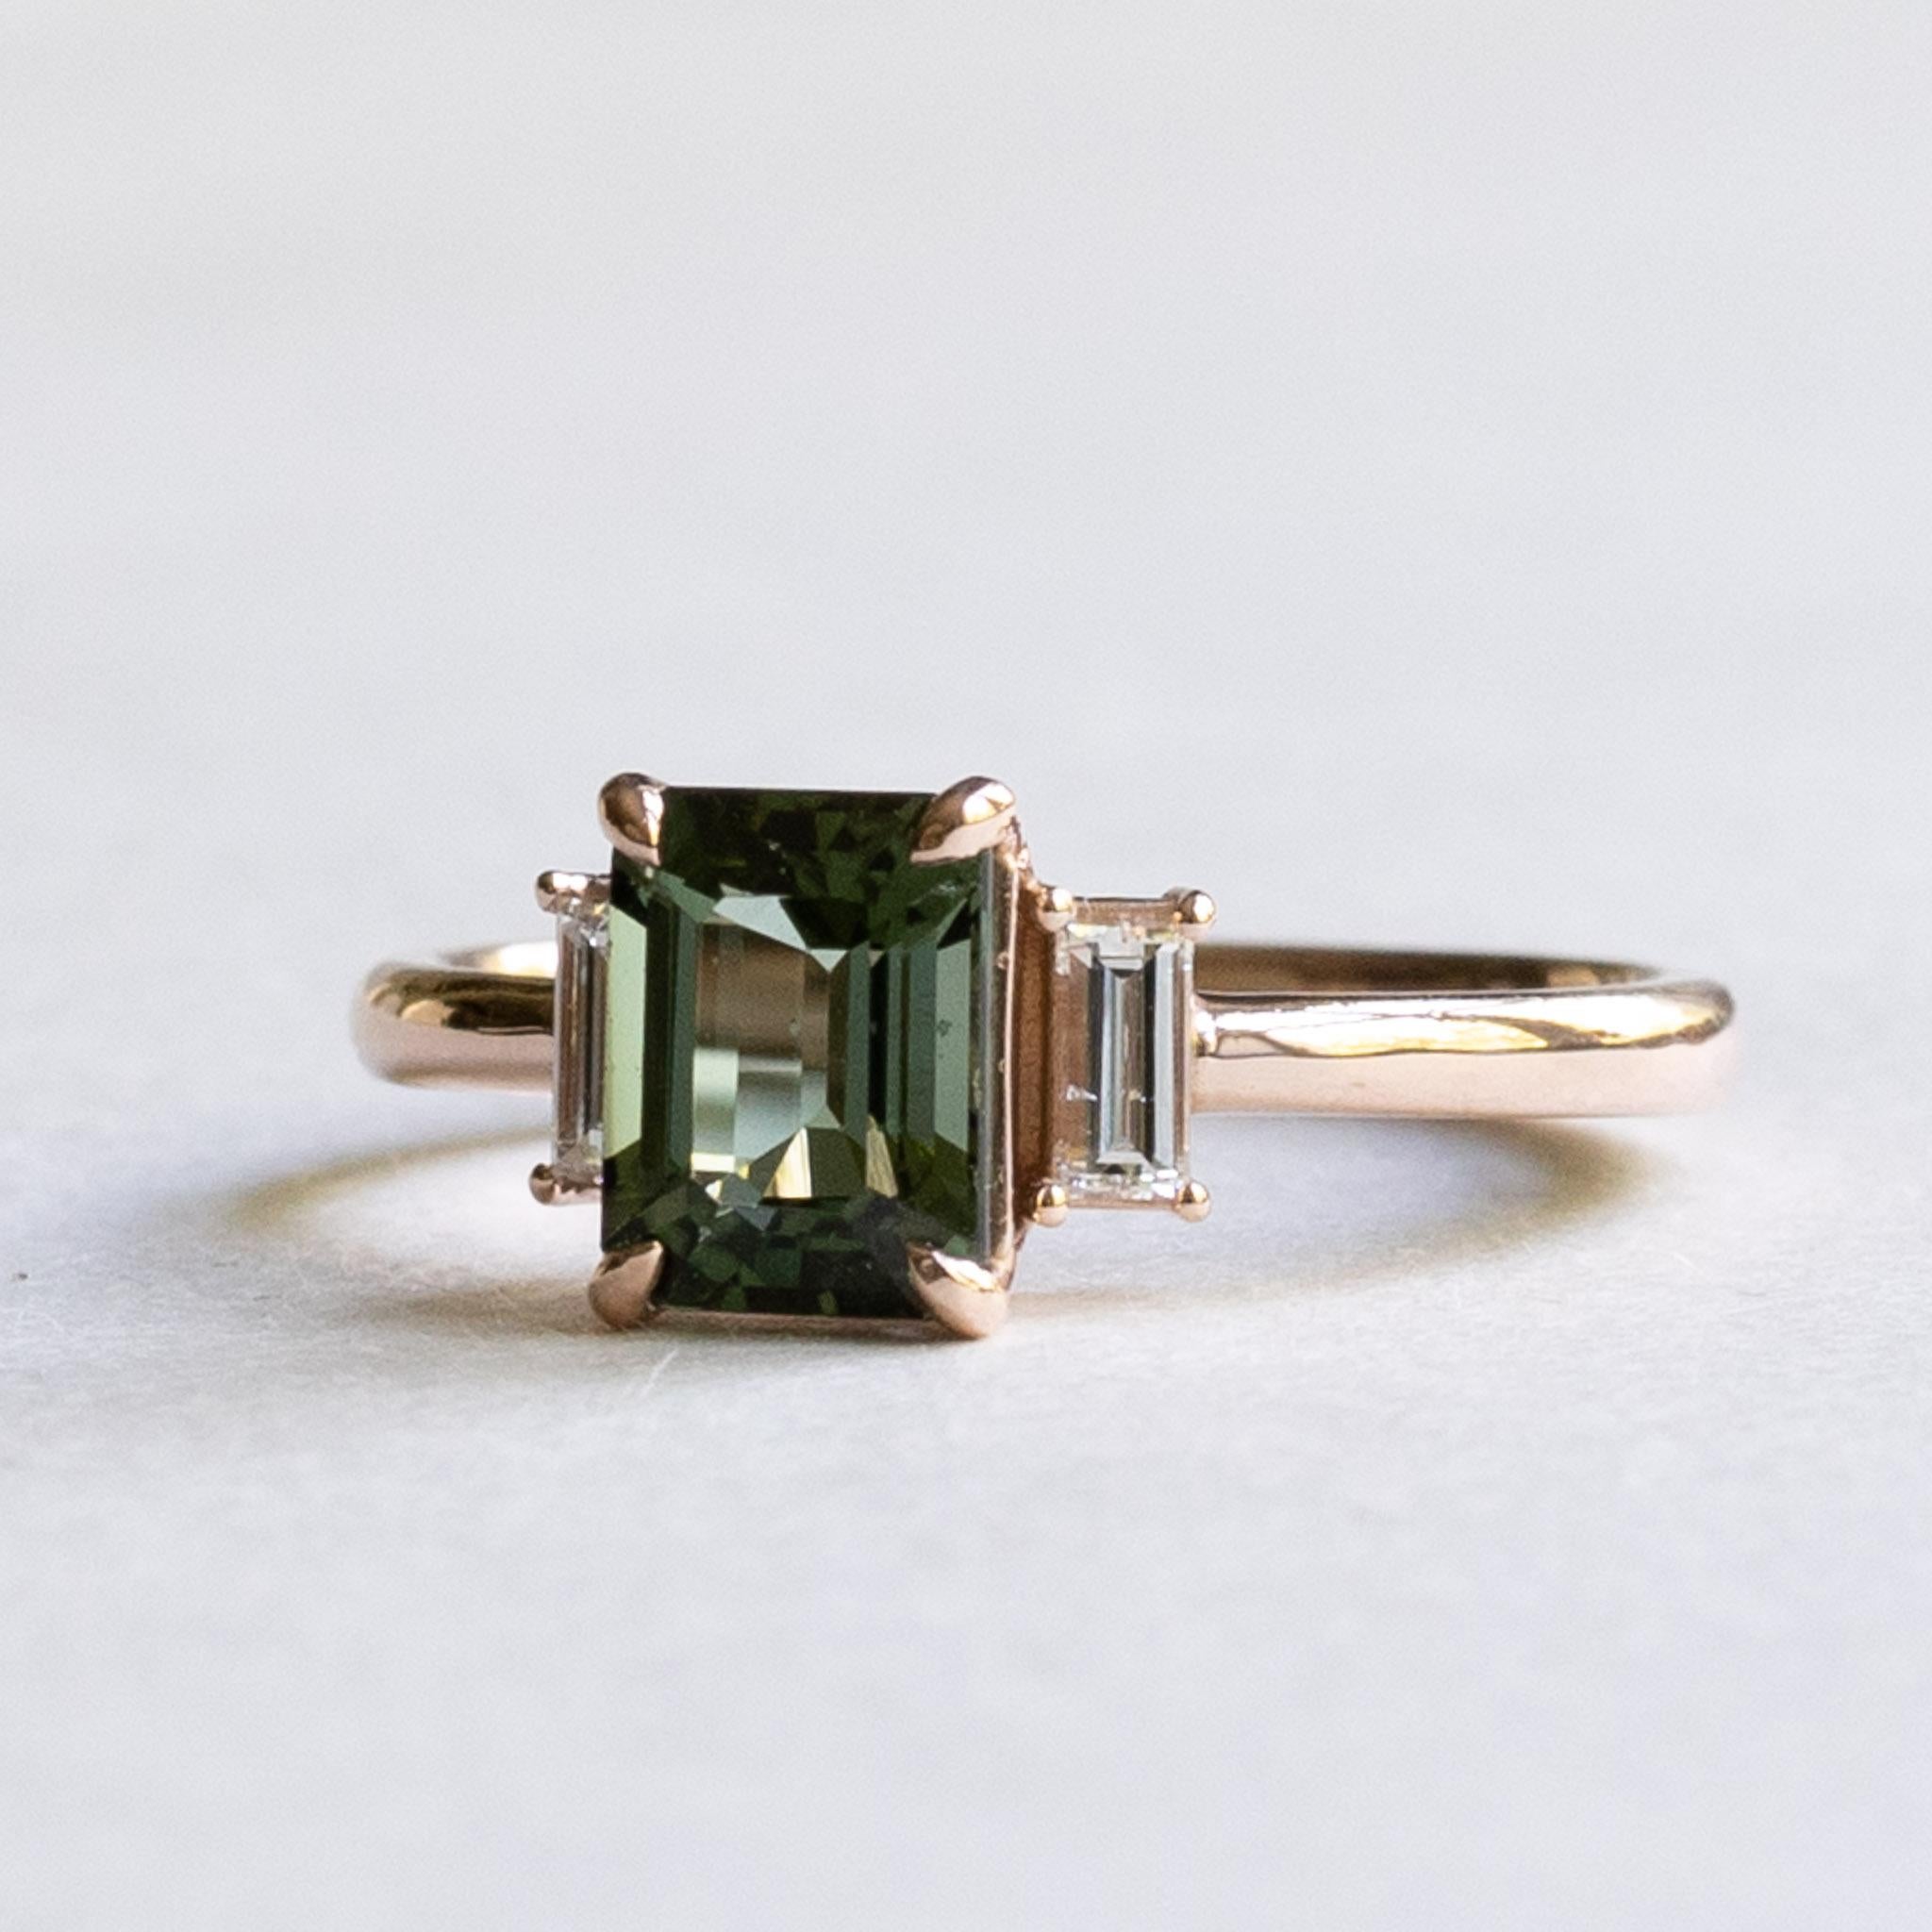 For Sale:  Green Tourmaline Emerald Cut Ring with Baguette Diamonds, Three Stone Ring 6